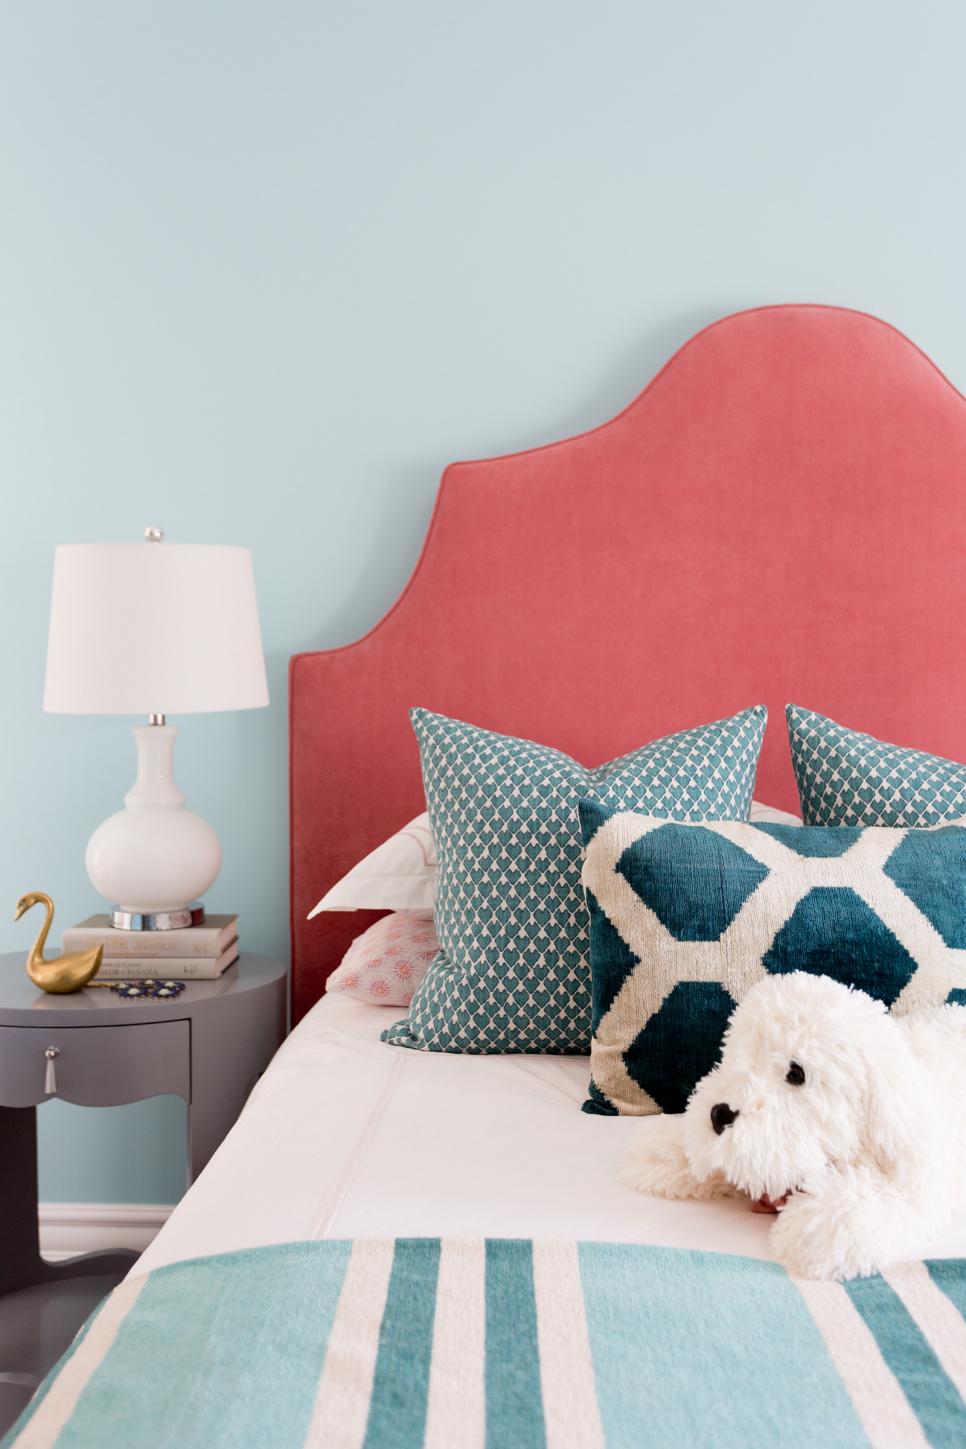 Blue Patterned Pillows Add Interest to Girls' Room | HGTV